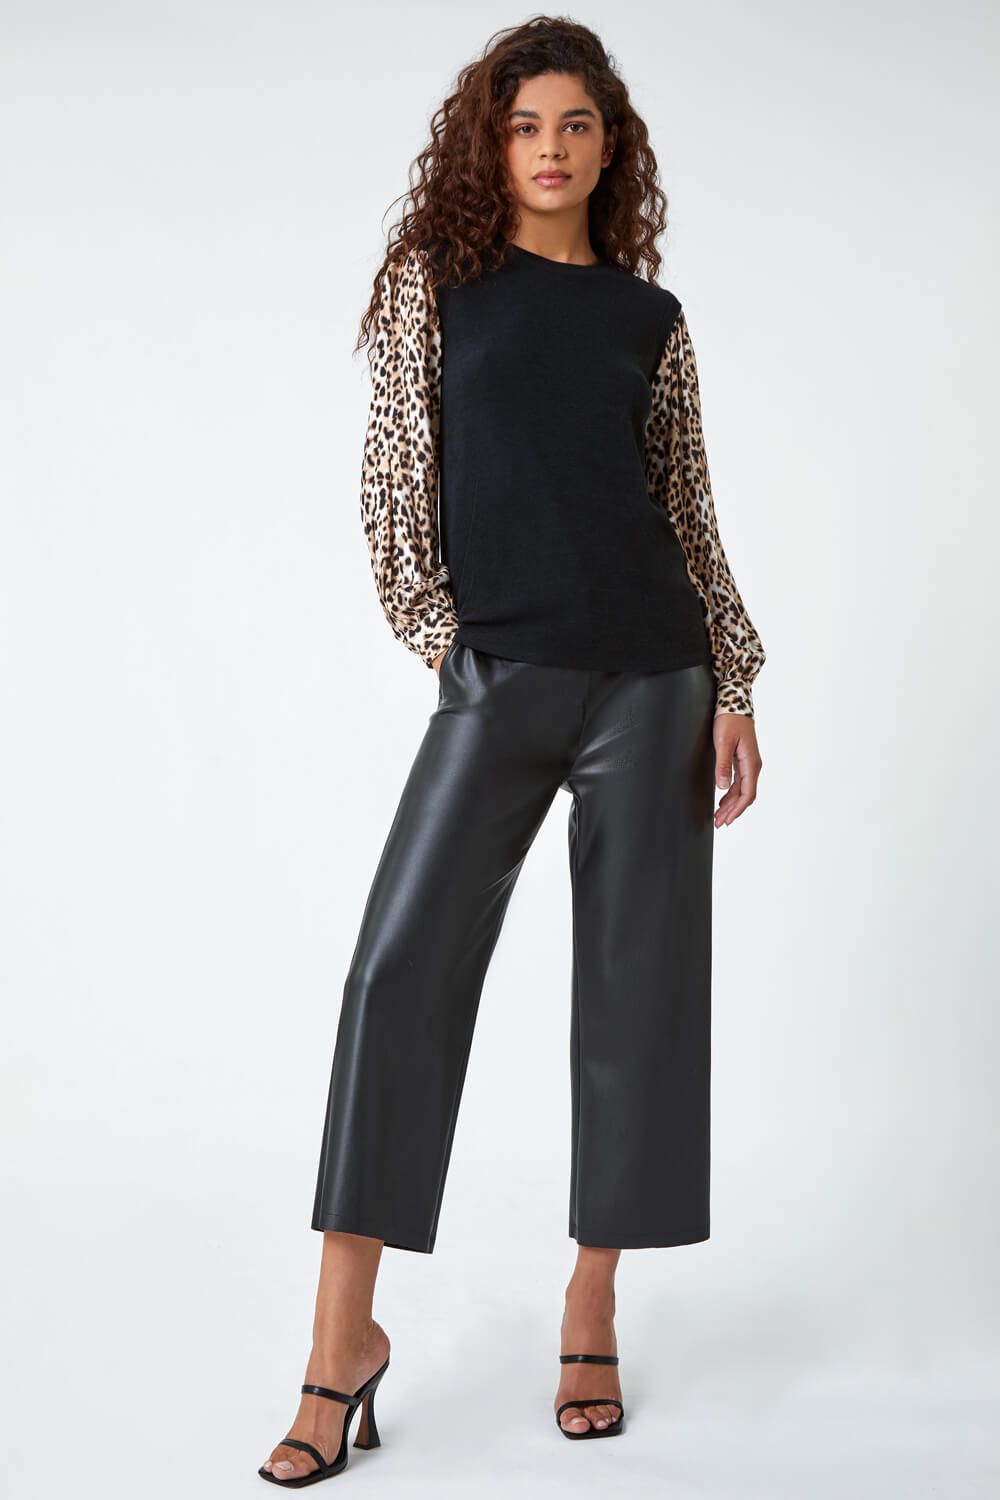 Black Animal Contrast Sleeve Stretch Top, Image 2 of 5